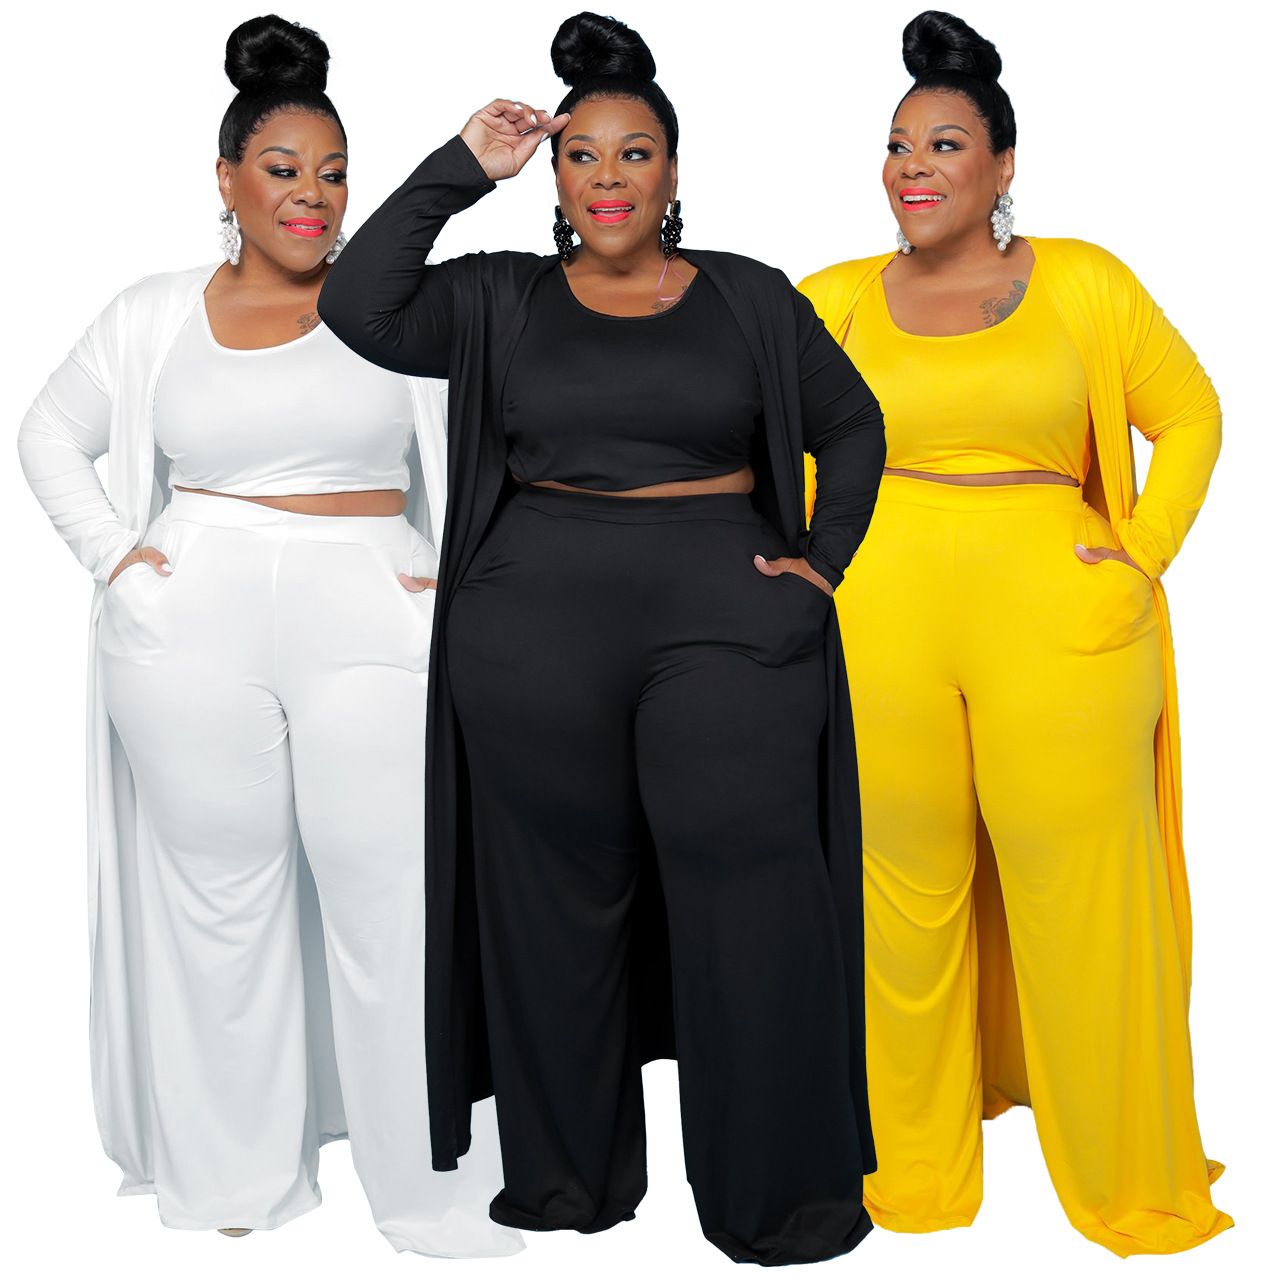 Buy Dropshipping Plus Size Tracksuits Online, Cheap Casual Women Plus Size Tracksuits Fashion Sports Home Robe Coat Pants Three Pieces Suit Womens Clothing Large Sizes Female L/XL/XXL/XXXL/XXXXL By Blueberry12 DHgate.Com